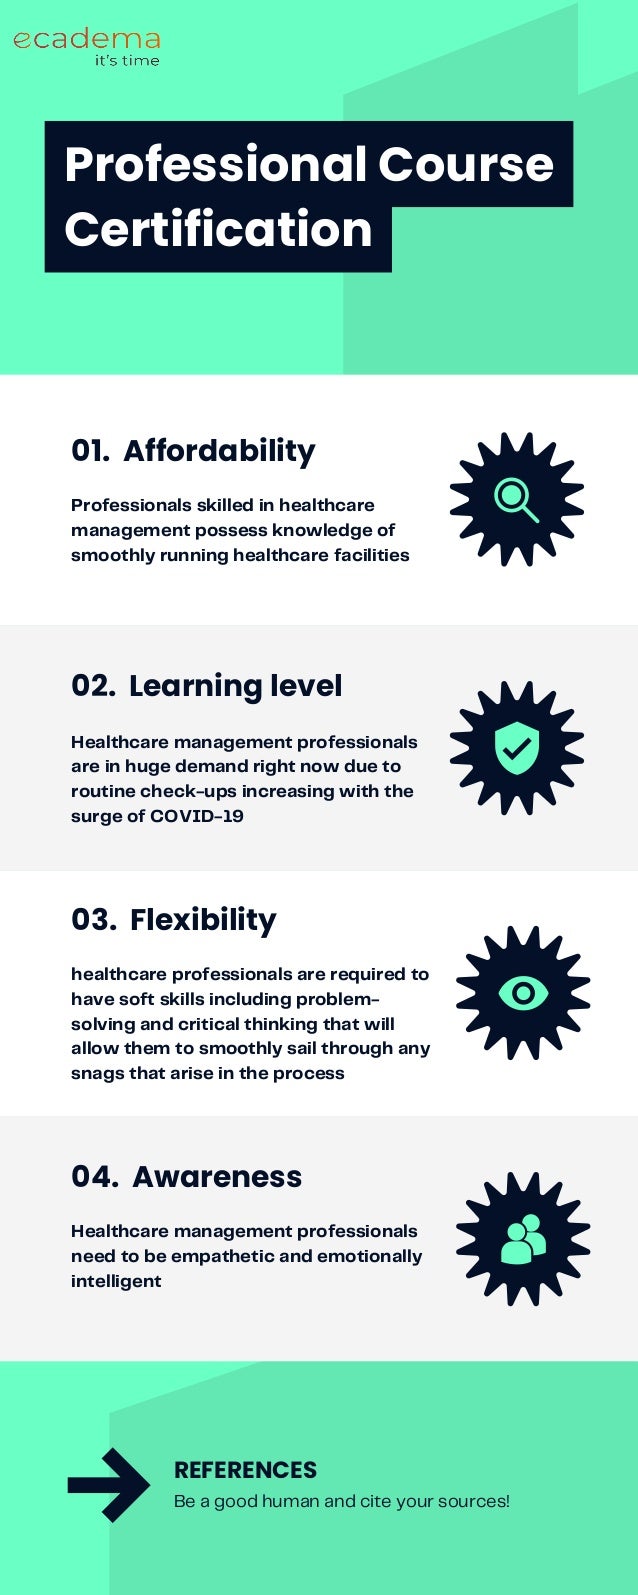 01. Affordability
Professionals skilled in healthcare
management possess knowledge of
smoothly running healthcare facilities


02. Learning level
Healthcare management professionals
are in huge demand right now due to
routine check-ups increasing with the
surge of COVID-19


03. Flexibility
healthcare professionals are required to
have soft skills including problem-
solving and critical thinking that will
allow them to smoothly sail through any
snags that arise in the process


04. Awareness
Healthcare management professionals
need to be empathetic and emotionally
intelligent


Be a good human and cite your sources!
REFERENCES
Professional Course
Certification
 